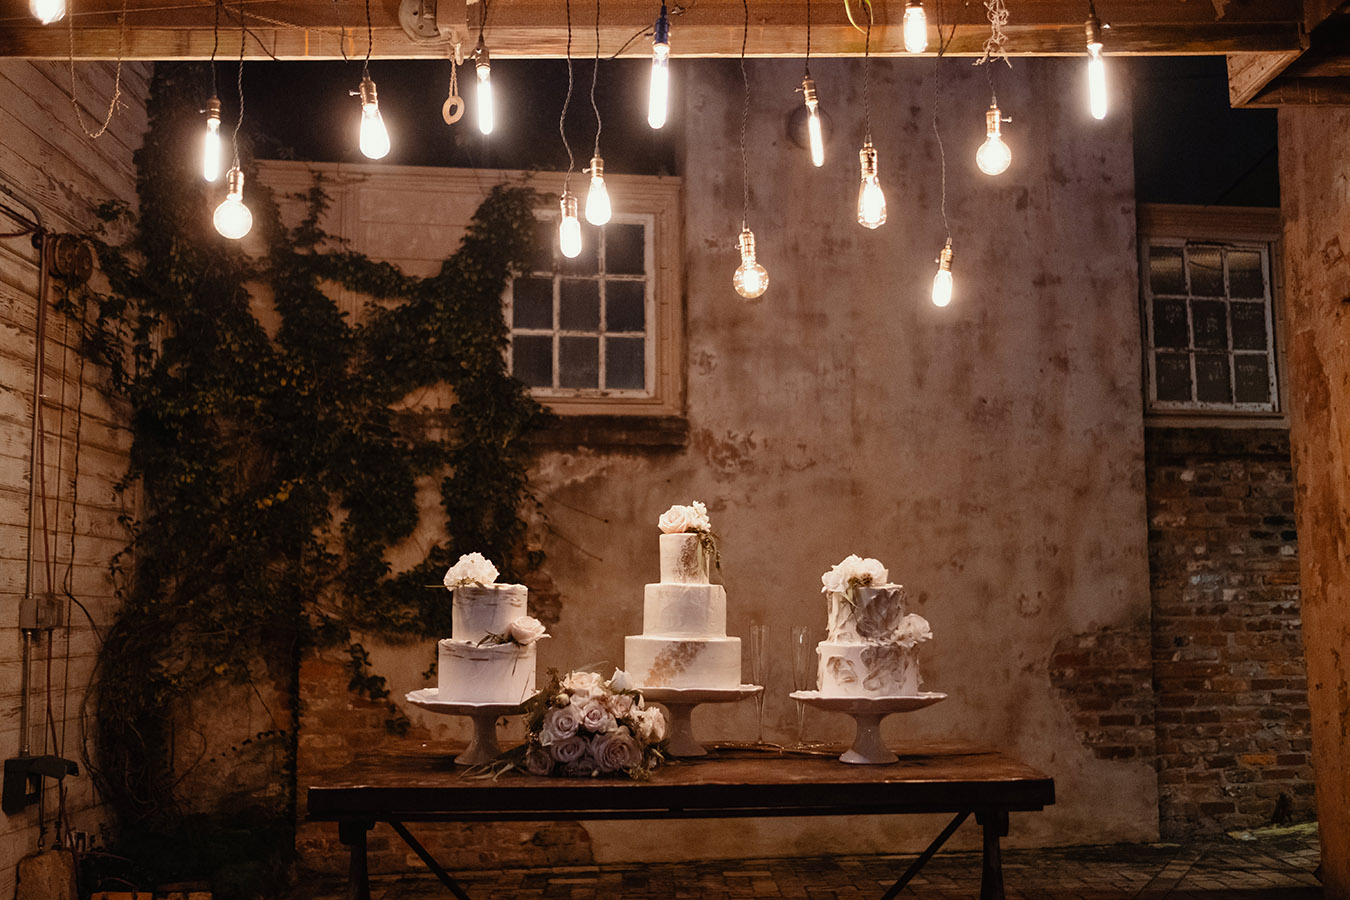 Frosted Fantasies by Nikki created three cakes that each mimicked the architectural details of the venue, such as the plaster on the wall behind the cake table.